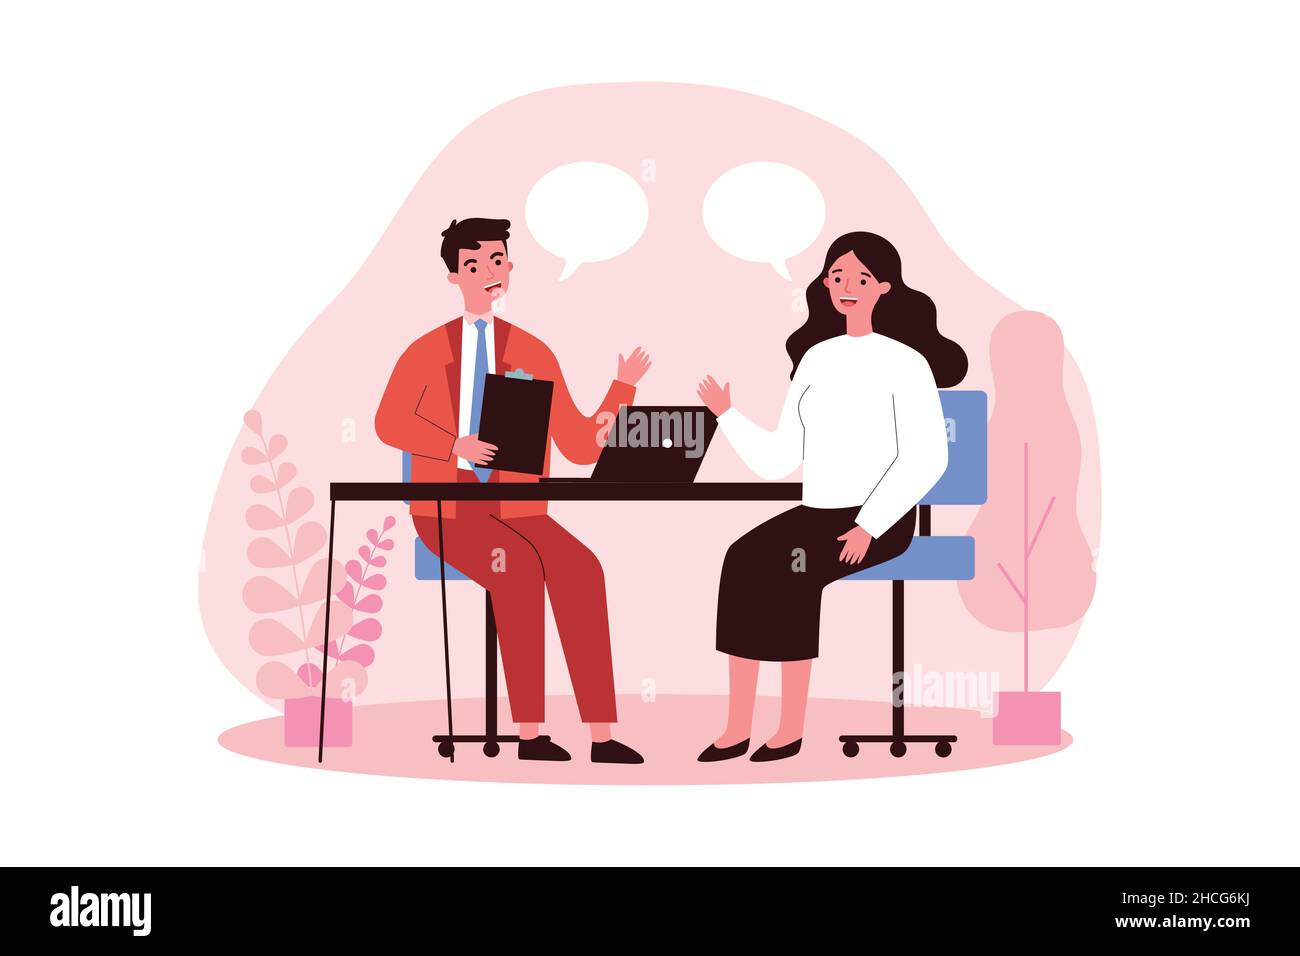 Two people talking to each other discussing about job and work. Office employee interview recruitment process. Flat vector red illustration Stock Vector